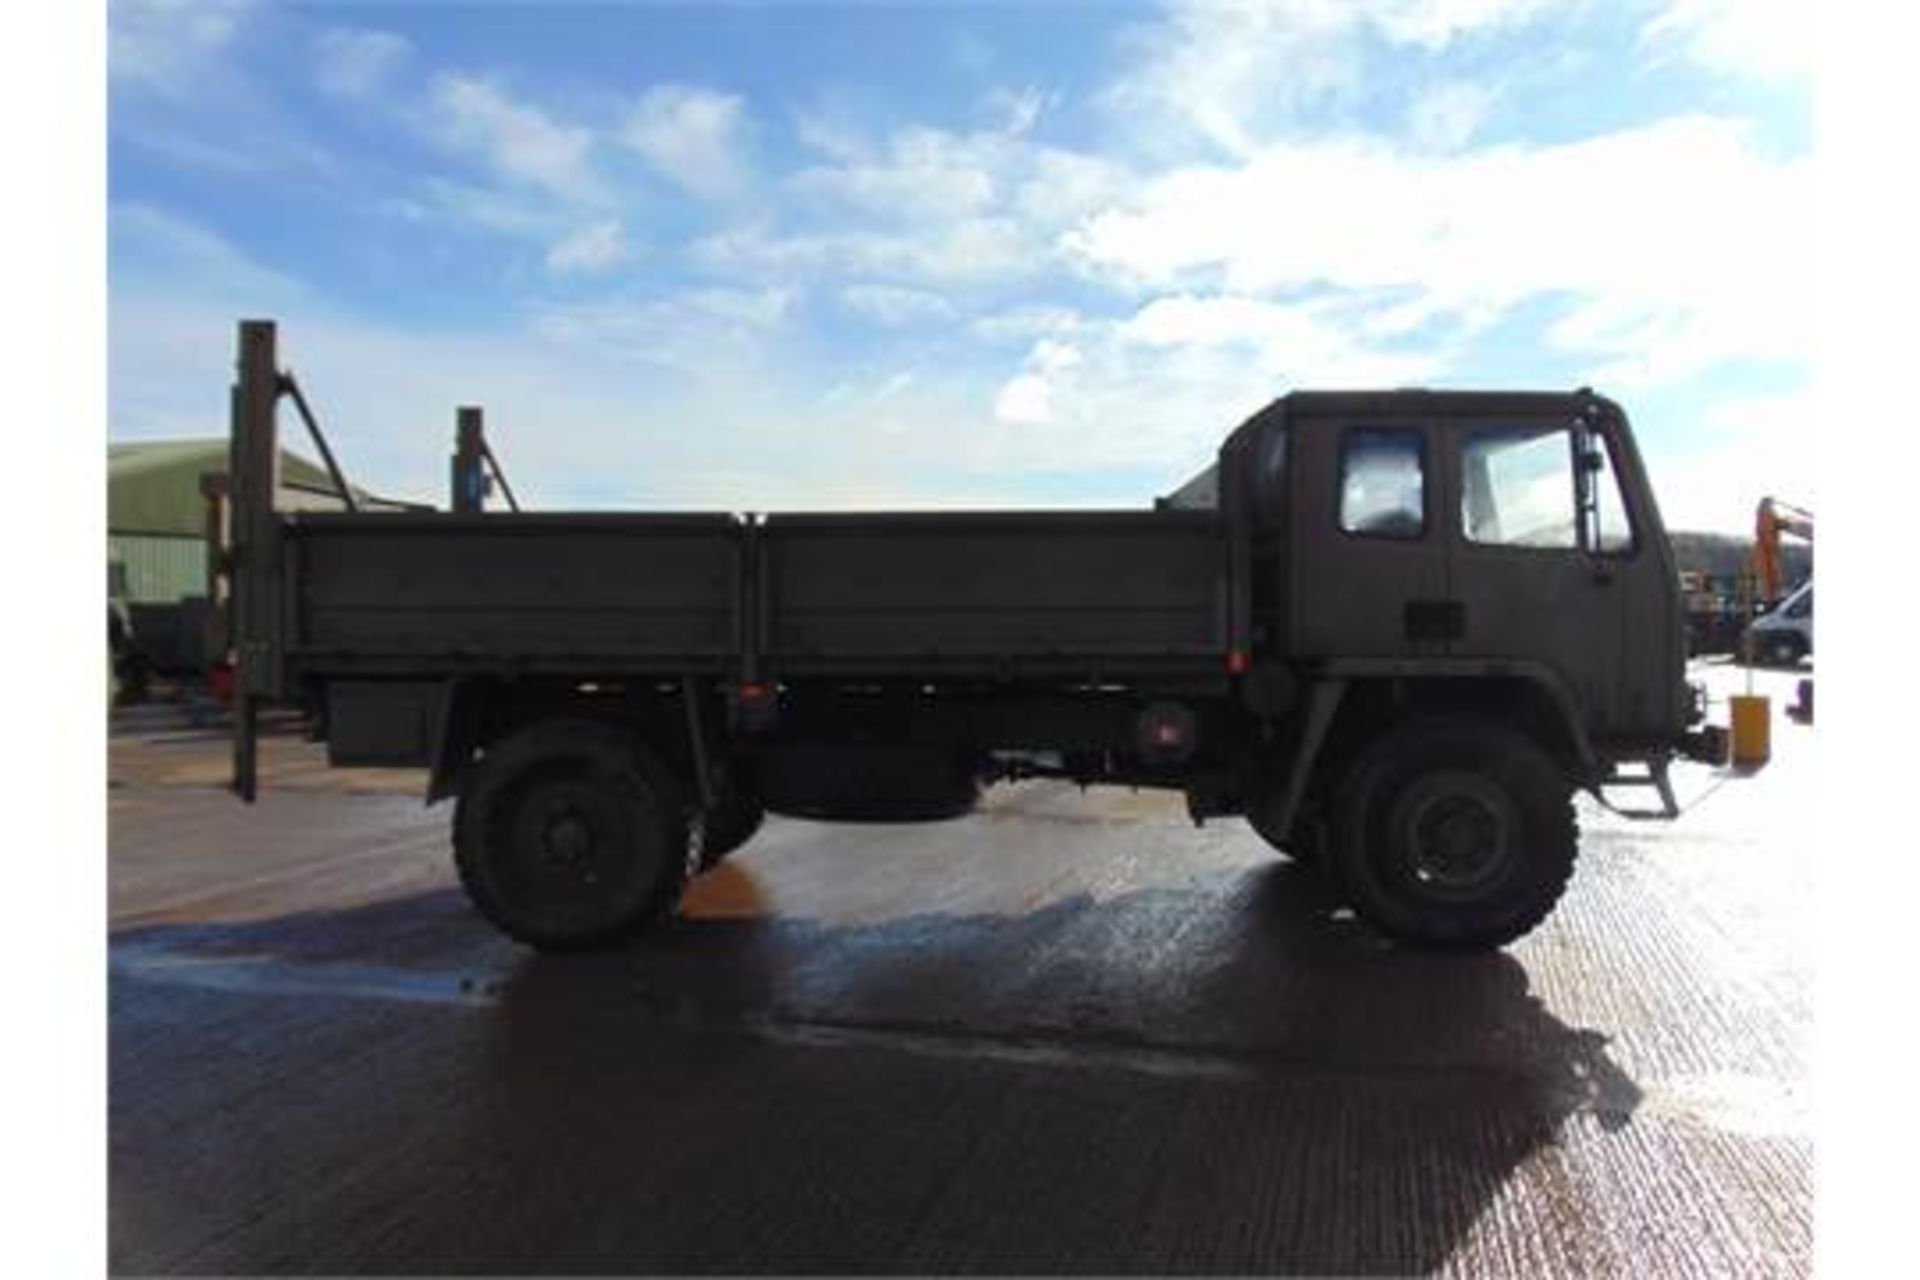 Leyland Daf 45/150 4 x 4 with Ratcliff 1000Kg Tail Lift - Image 4 of 15